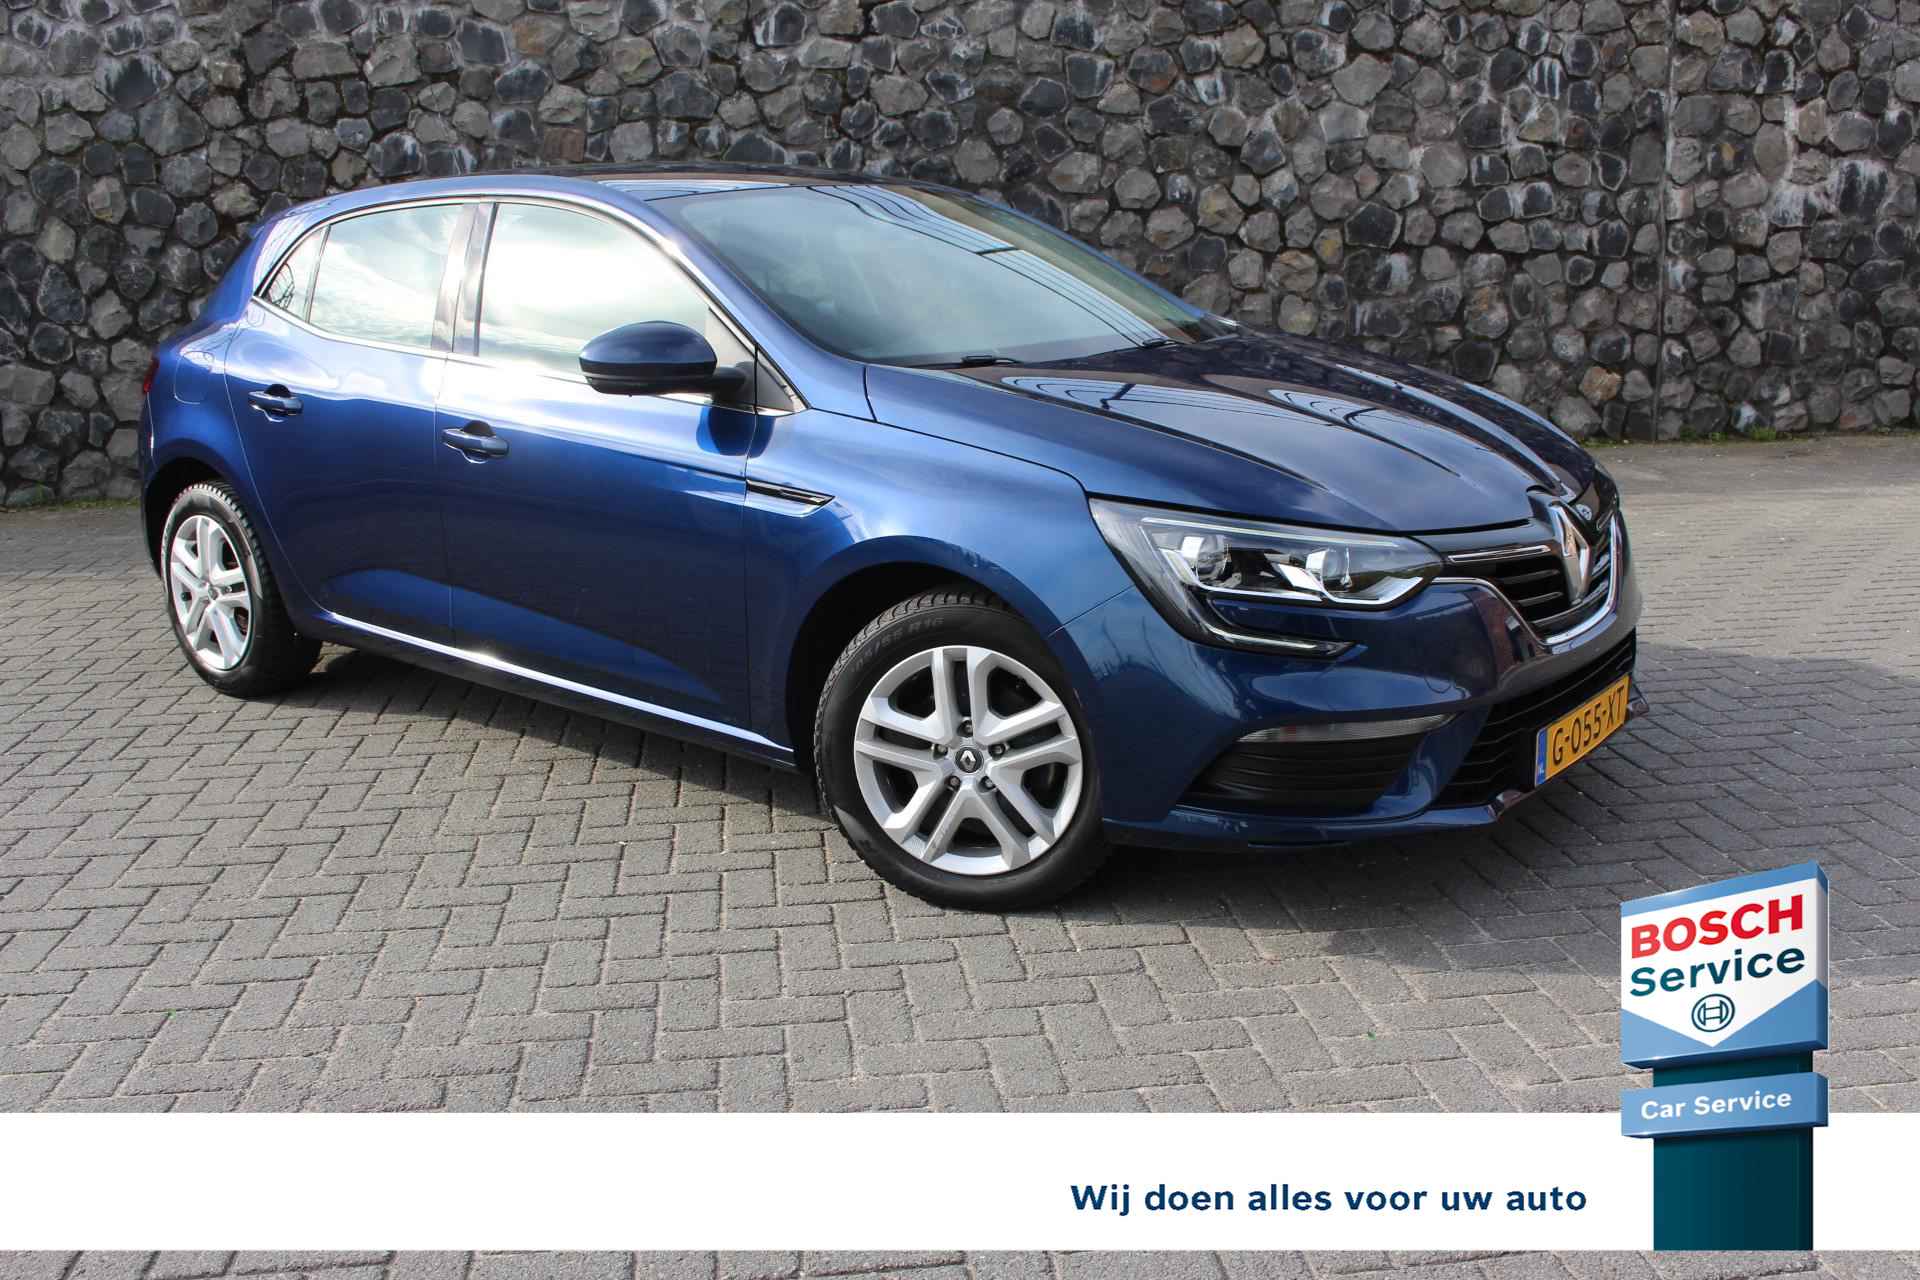 Renault Mégane 1.3 TCe Zen Dab+ audio Climate + cruise control Navi PDC achter Led verlichting voor + achter - 22/34